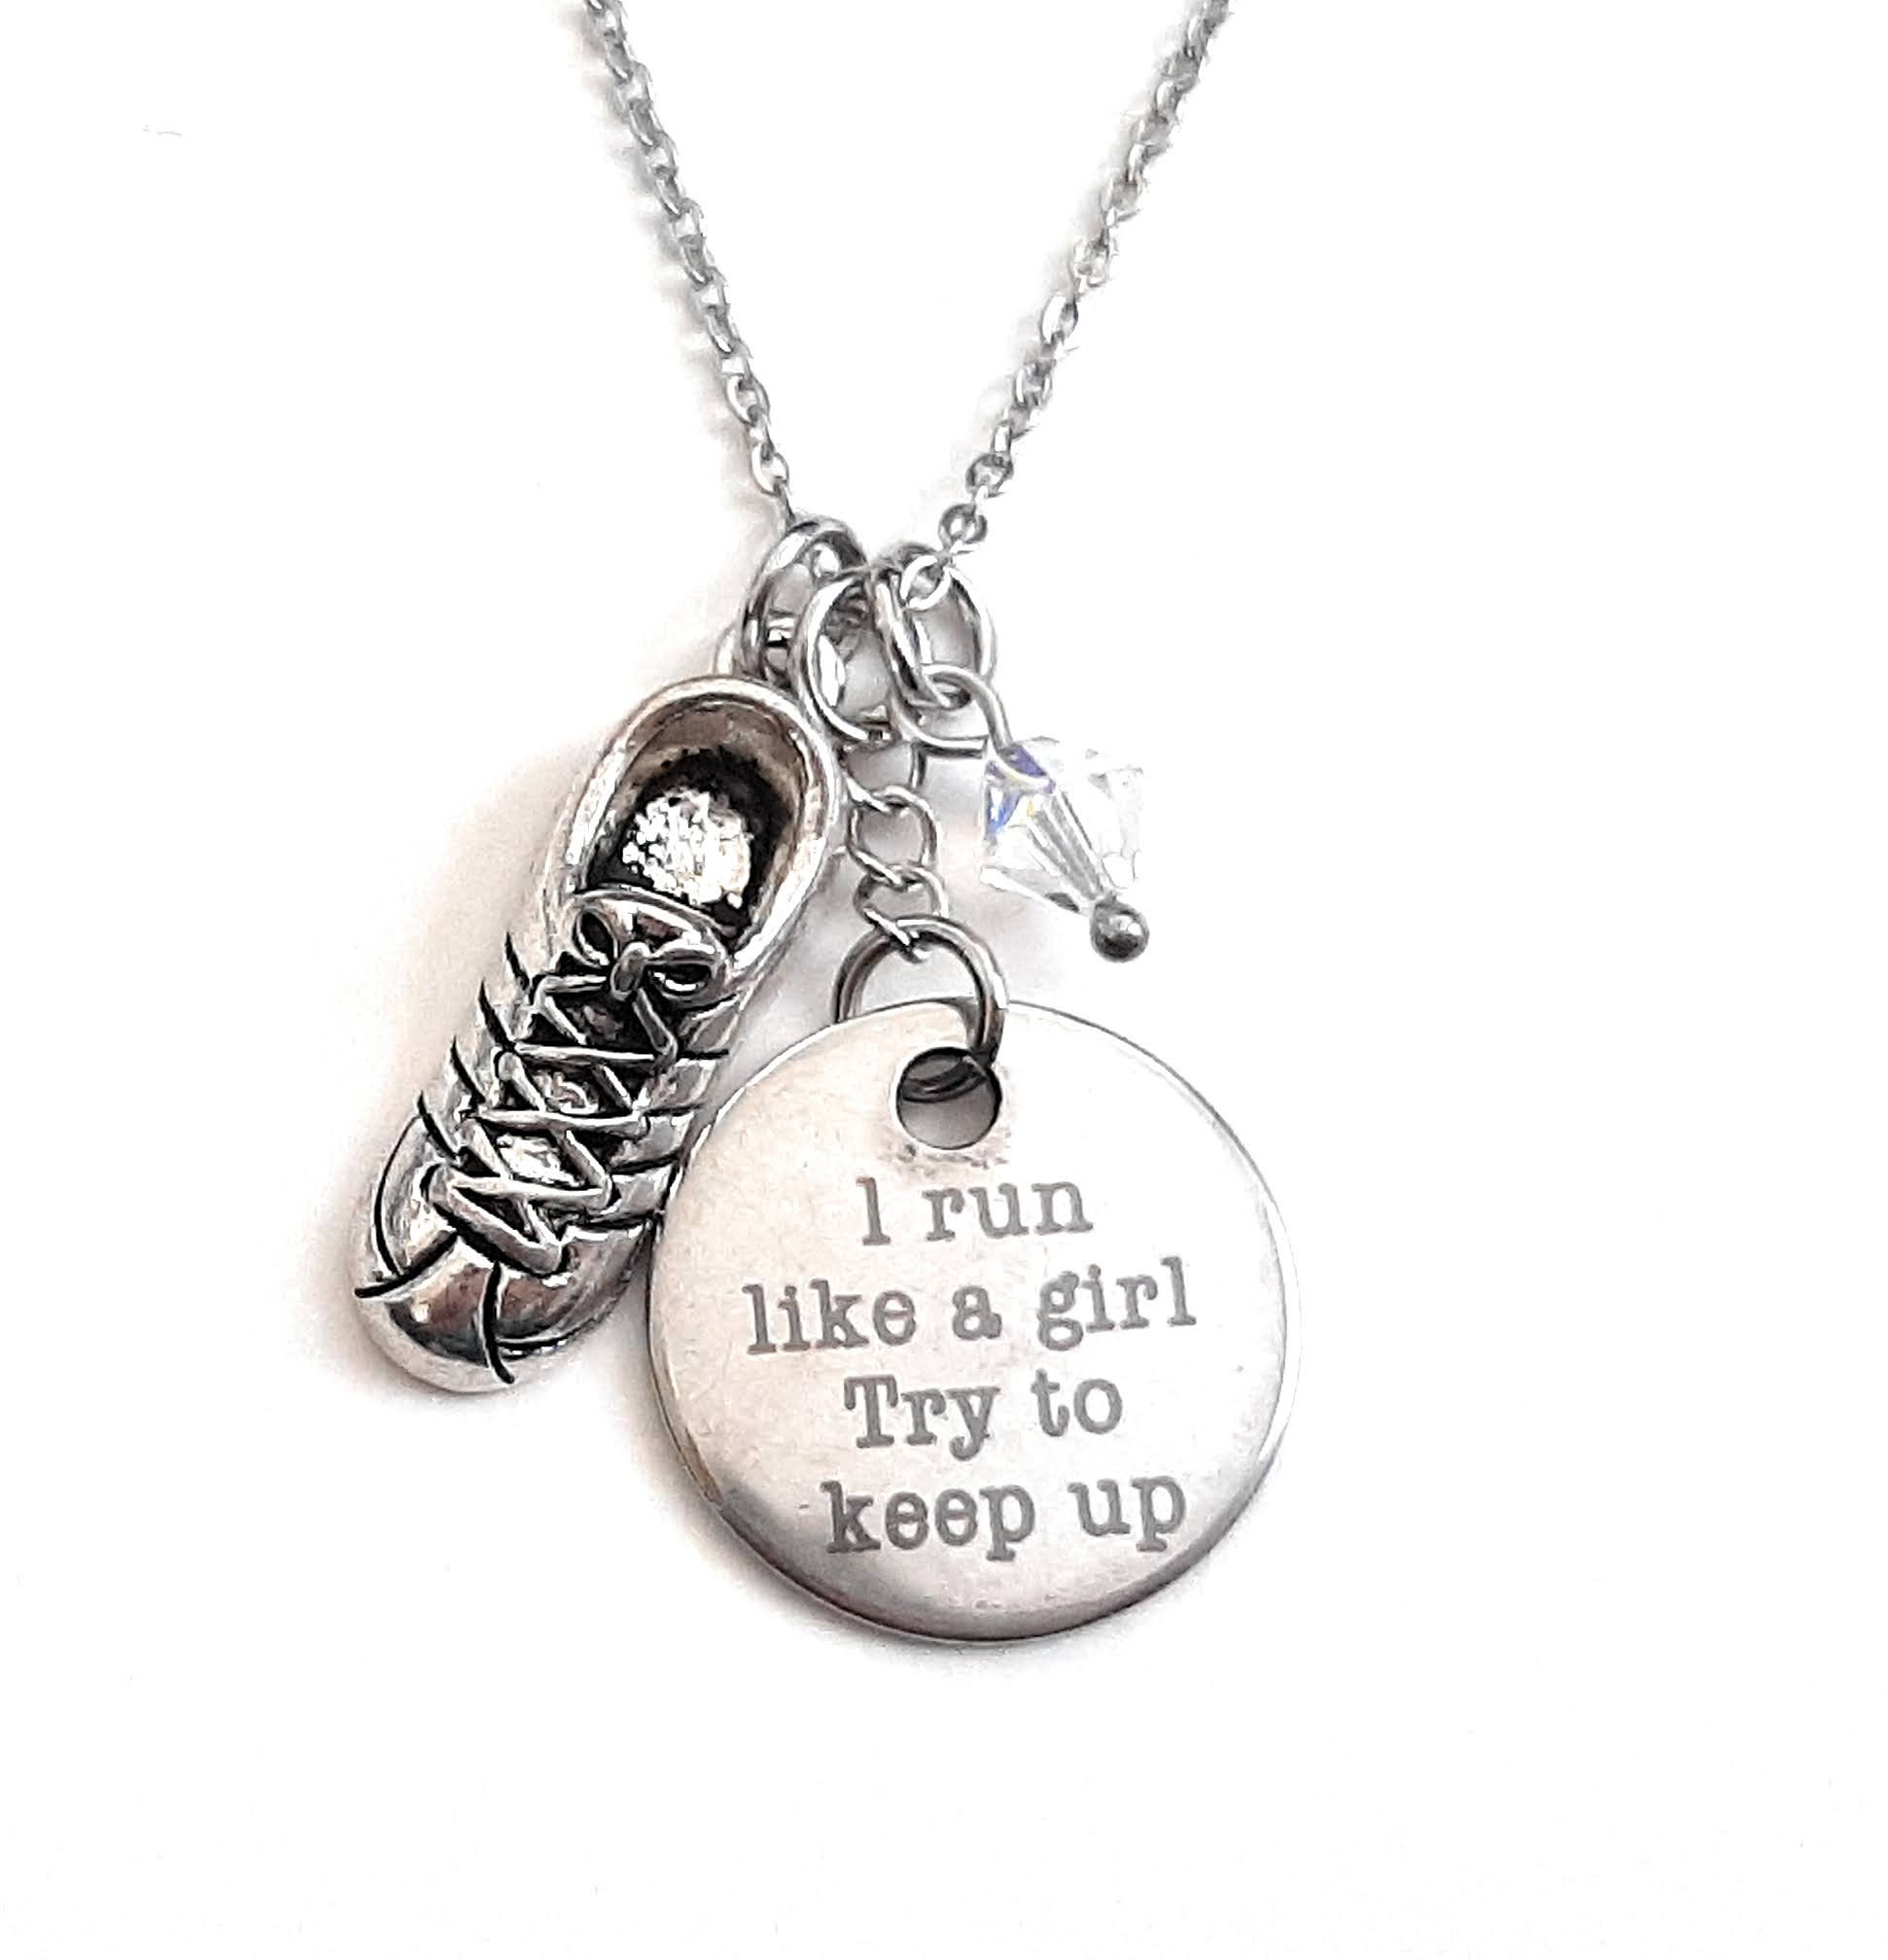 Runner Message Pendant Necklace "I run like a girl Try to keep up" Your Choice of Charm and Birthstone Color